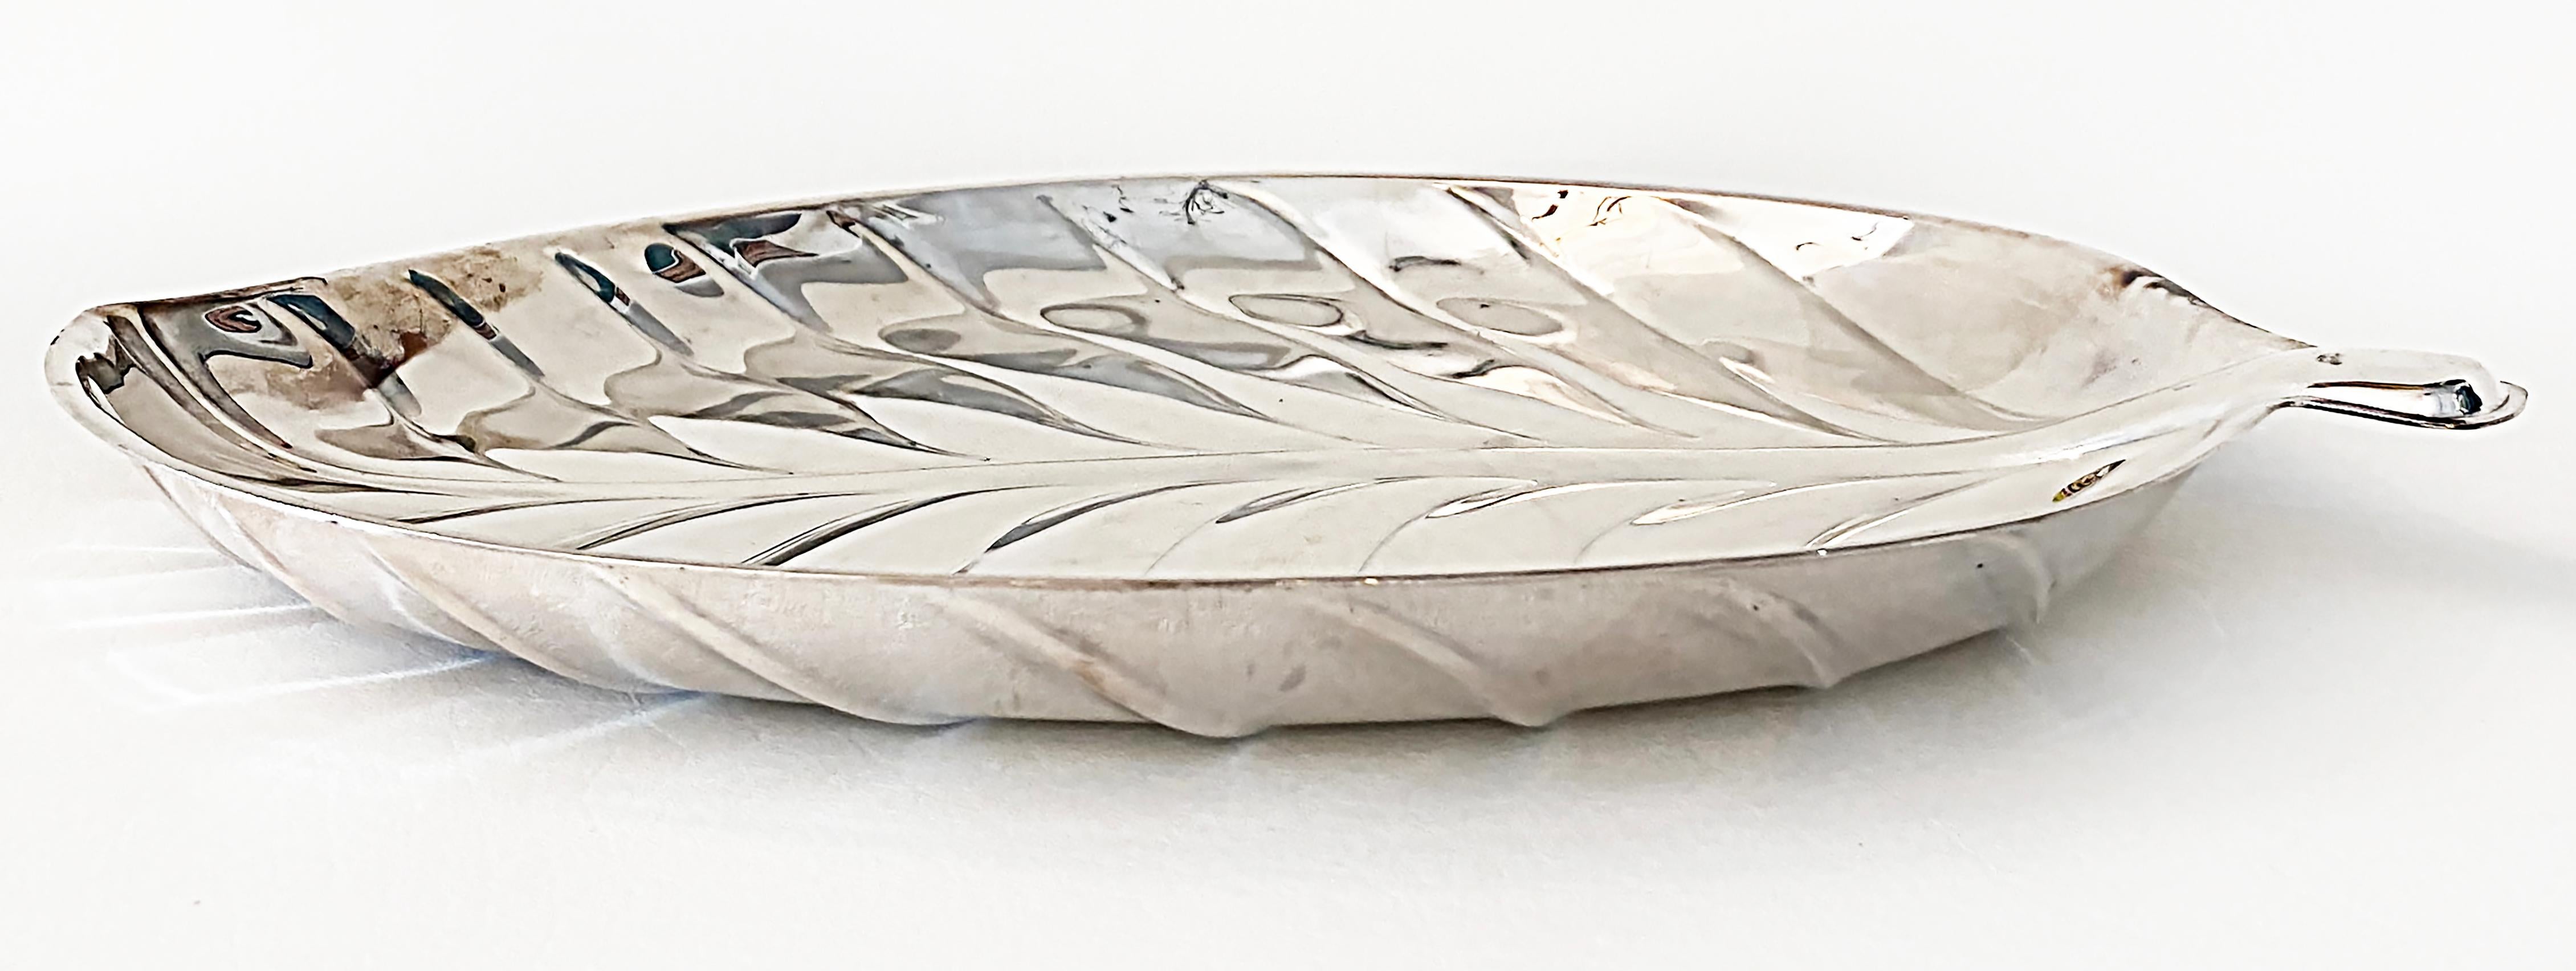 Américain International Silver Leaf Plated Serving Tray, Mid-Late 20th Century, #8199 en vente